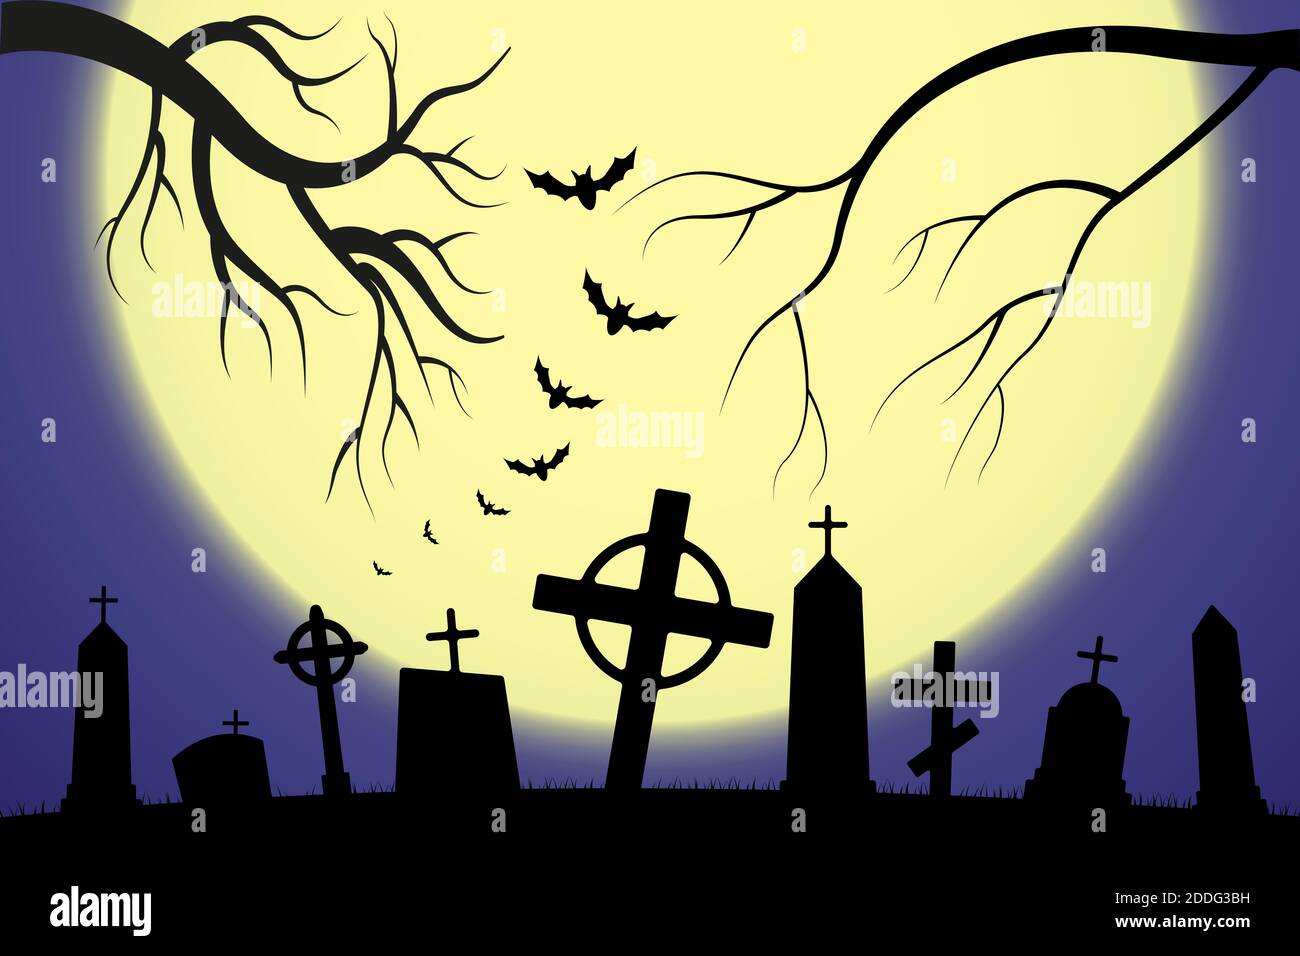 Halloween scary graveyard background with trees, crosses and bats. Halloween. Silhouette of a tombstone. Printed labels and decorations for office, cr Stock Vector